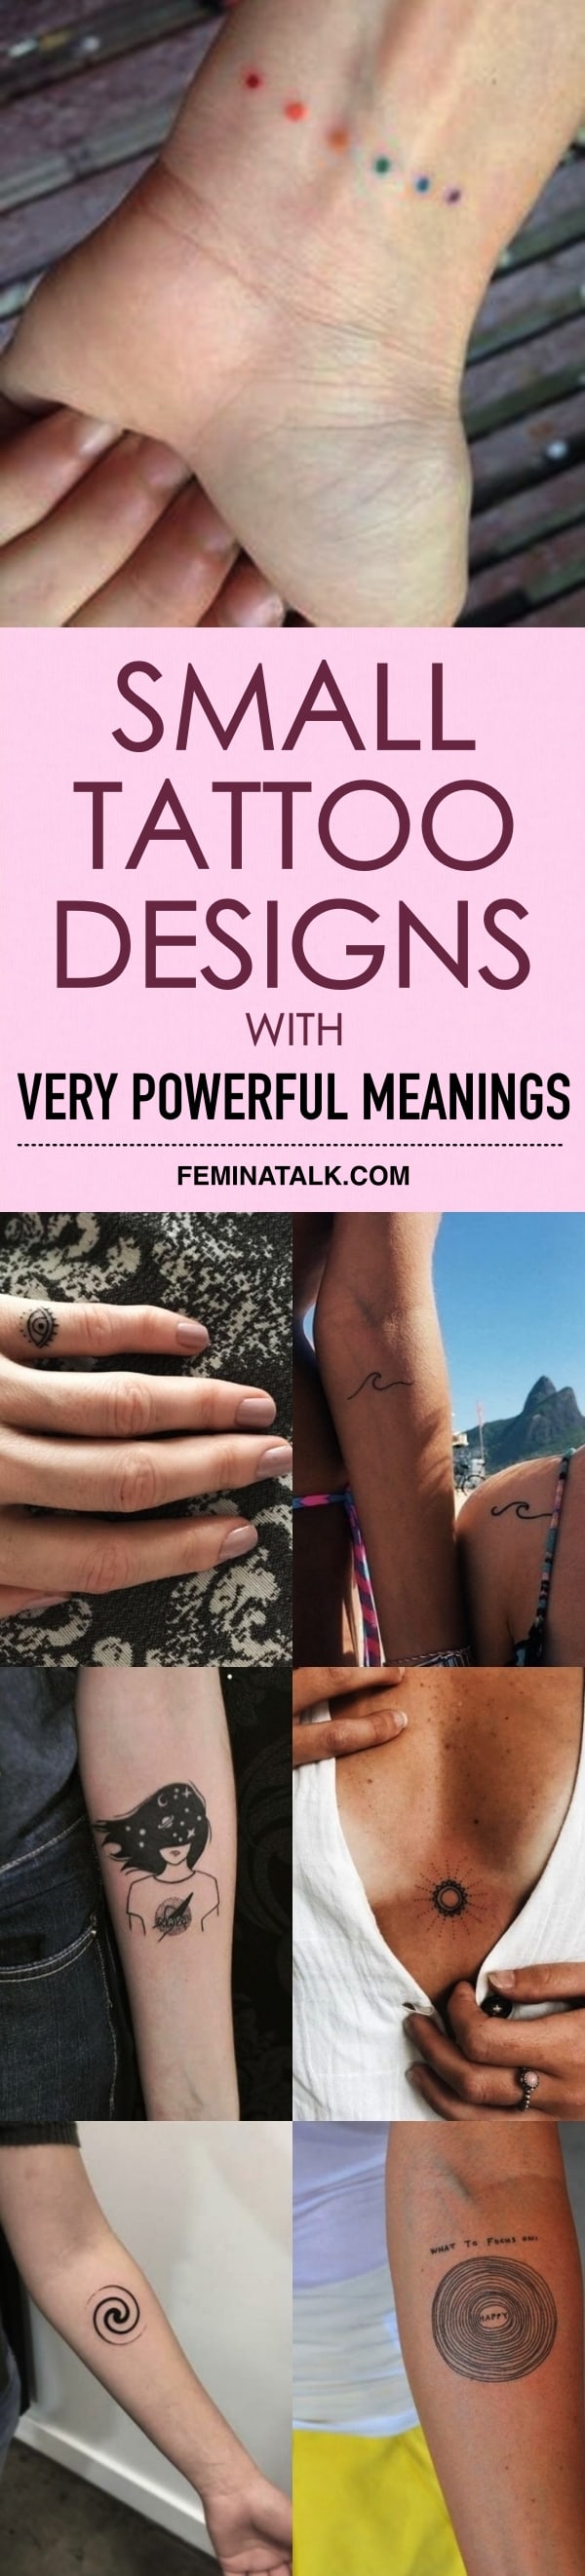 Small Tattoo Designs with Very Powerful Meanings